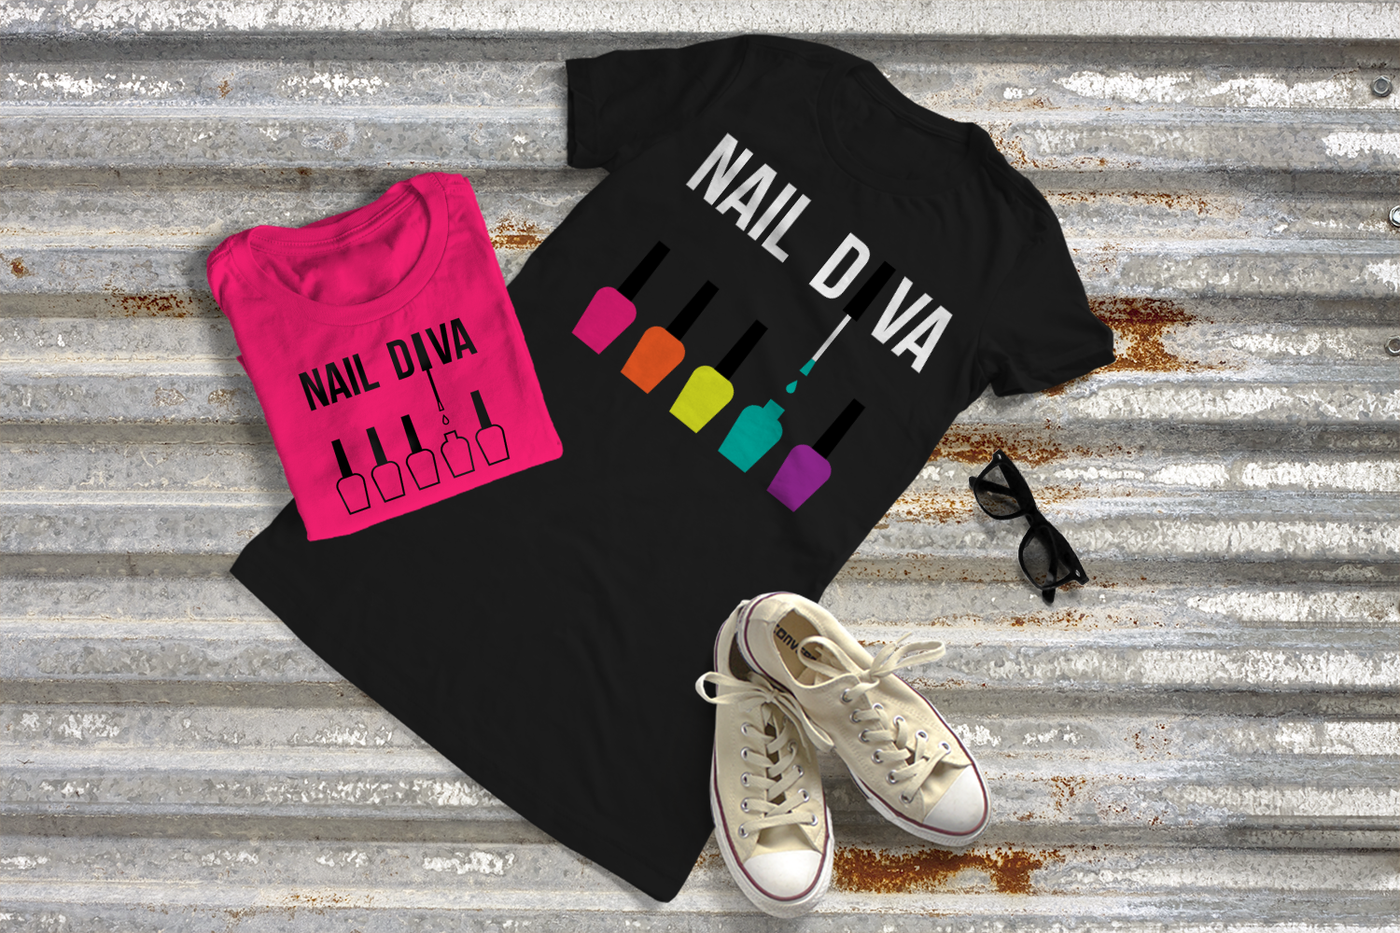 Shirt that says "Nail diva" with 5 bottles of polish.